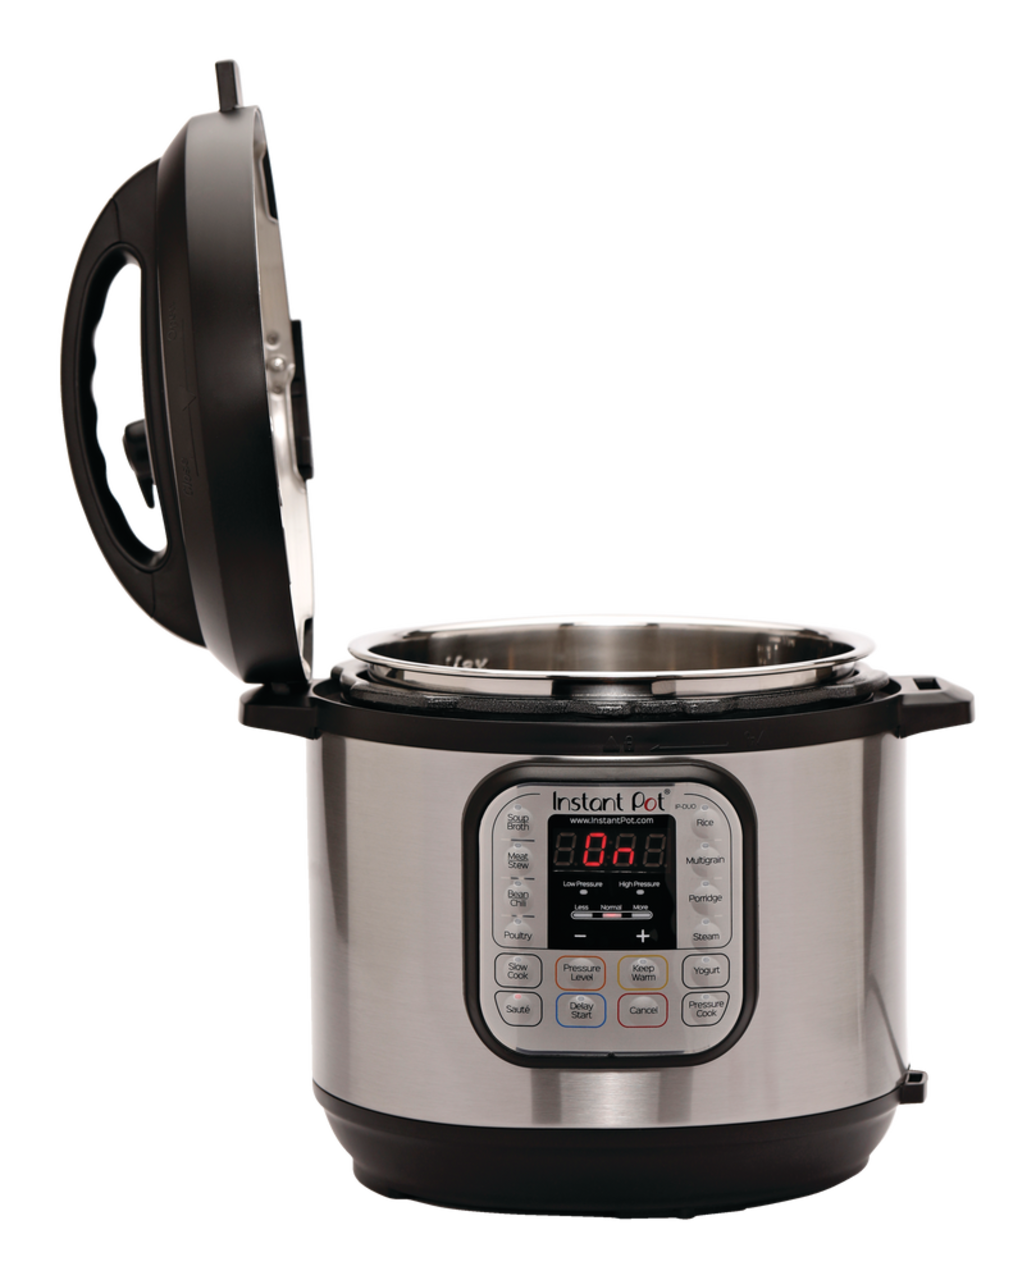 https://media-www.canadiantire.ca/product/living/kitchen/kitchen-appliances/0432672/instant-pot-duo-6-quart-pressure-cooker-a5b010f6-c927-4117-b84b-7326d5adab60.png?imdensity=1&imwidth=1244&impolicy=mZoom